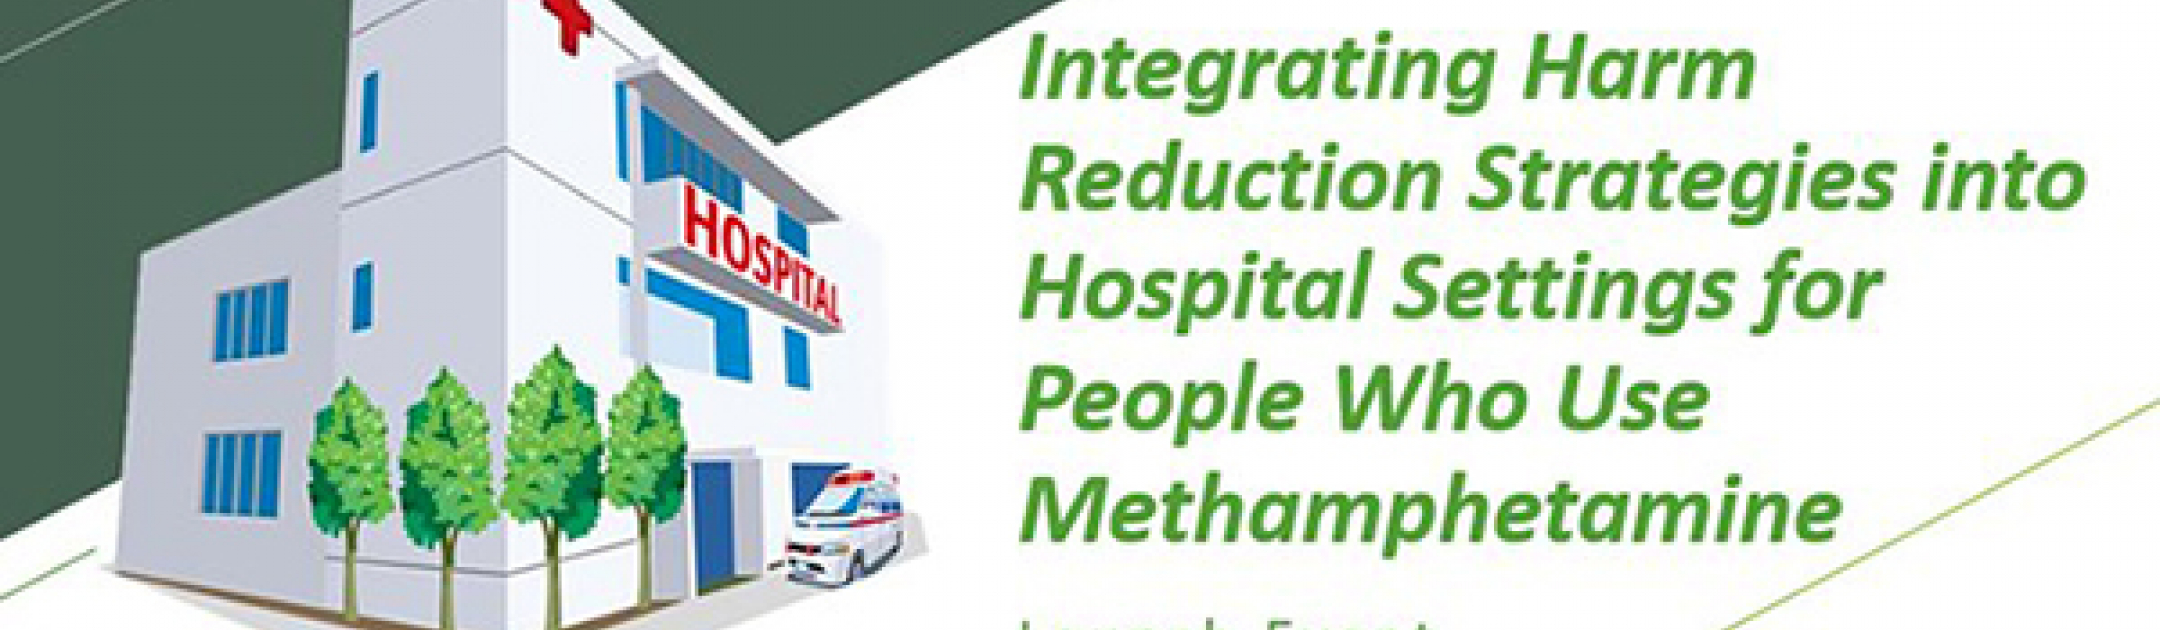 Graphic of hospital building and text of Integrating Harm Reduction Strategies Into Hospital Settings For People Who Use Methamphetamine